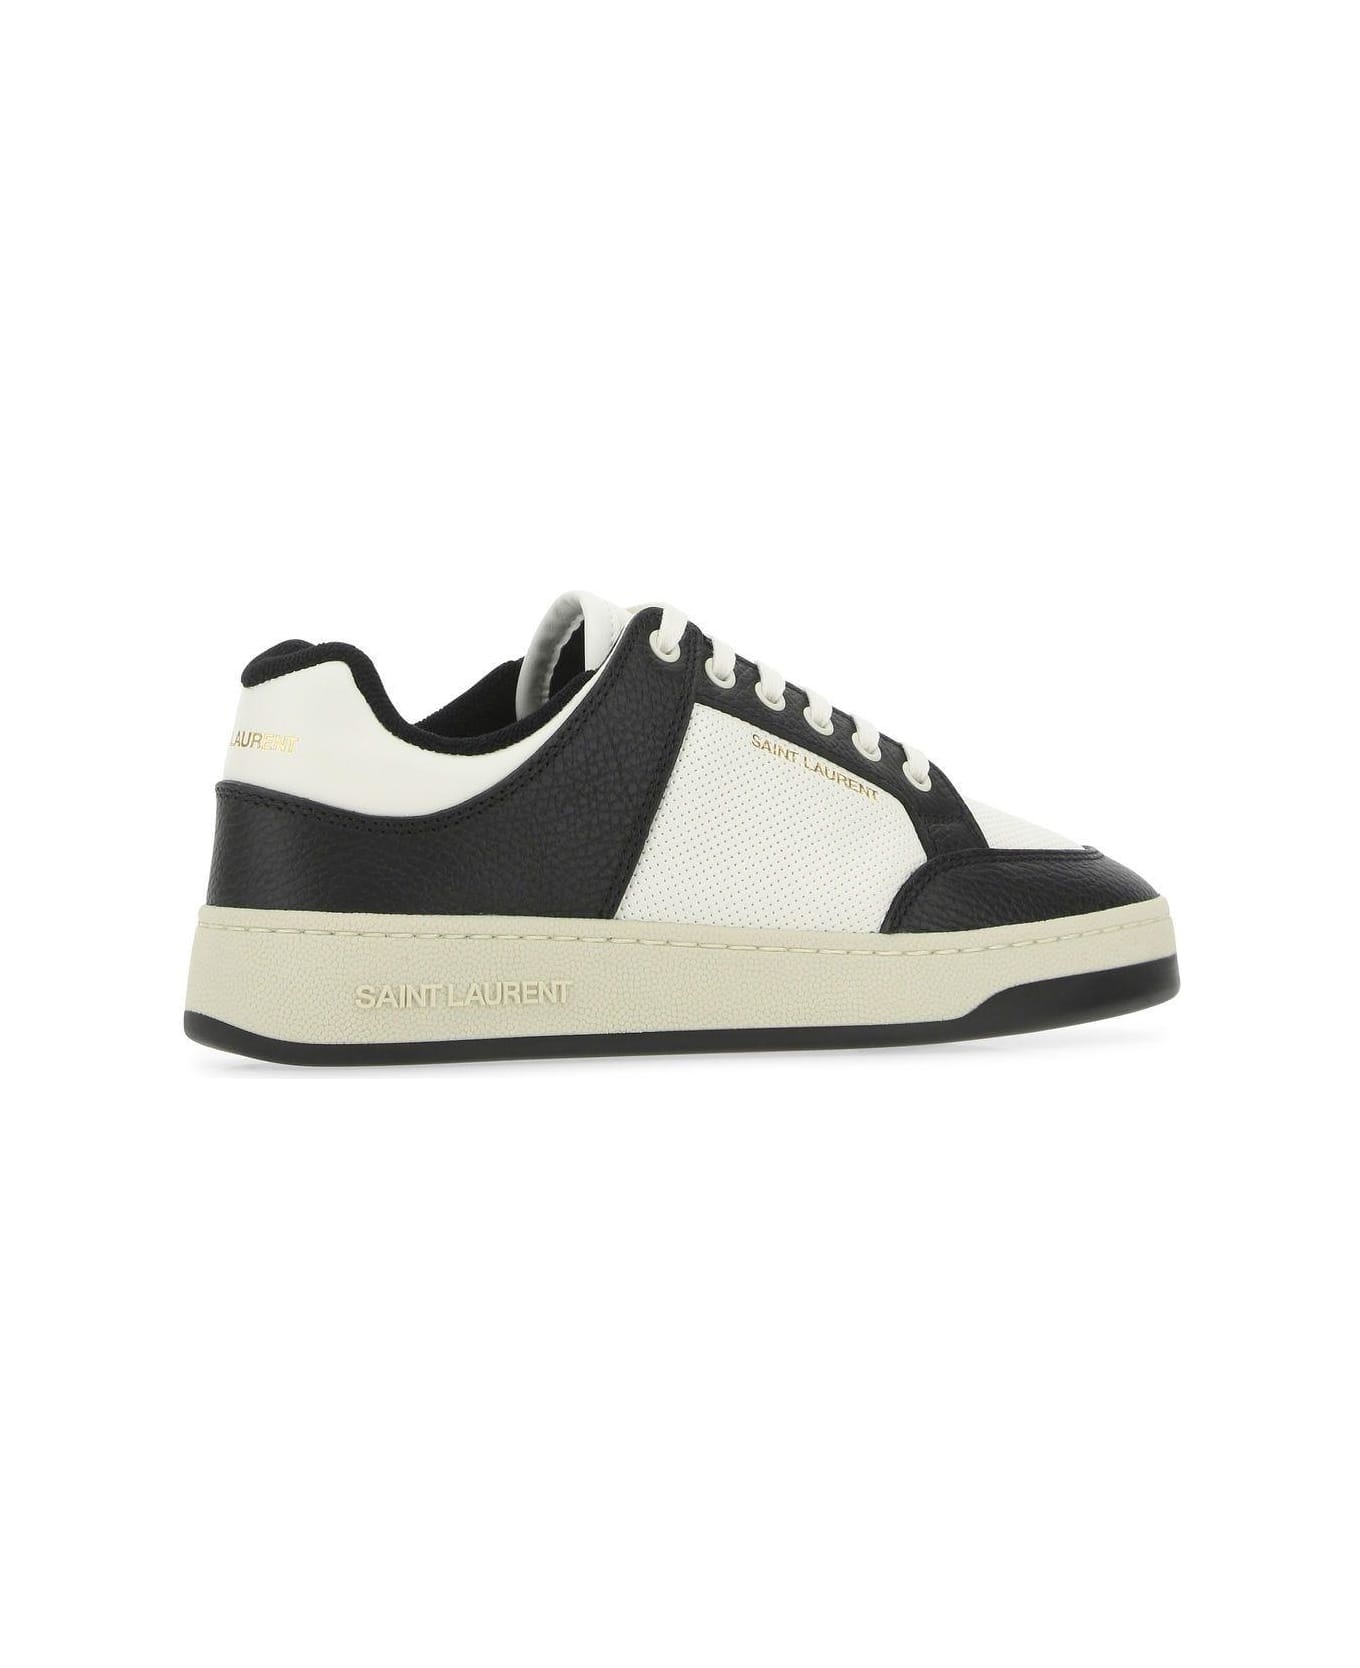 Two-tone Leather Sl/61 Sneakers - 3